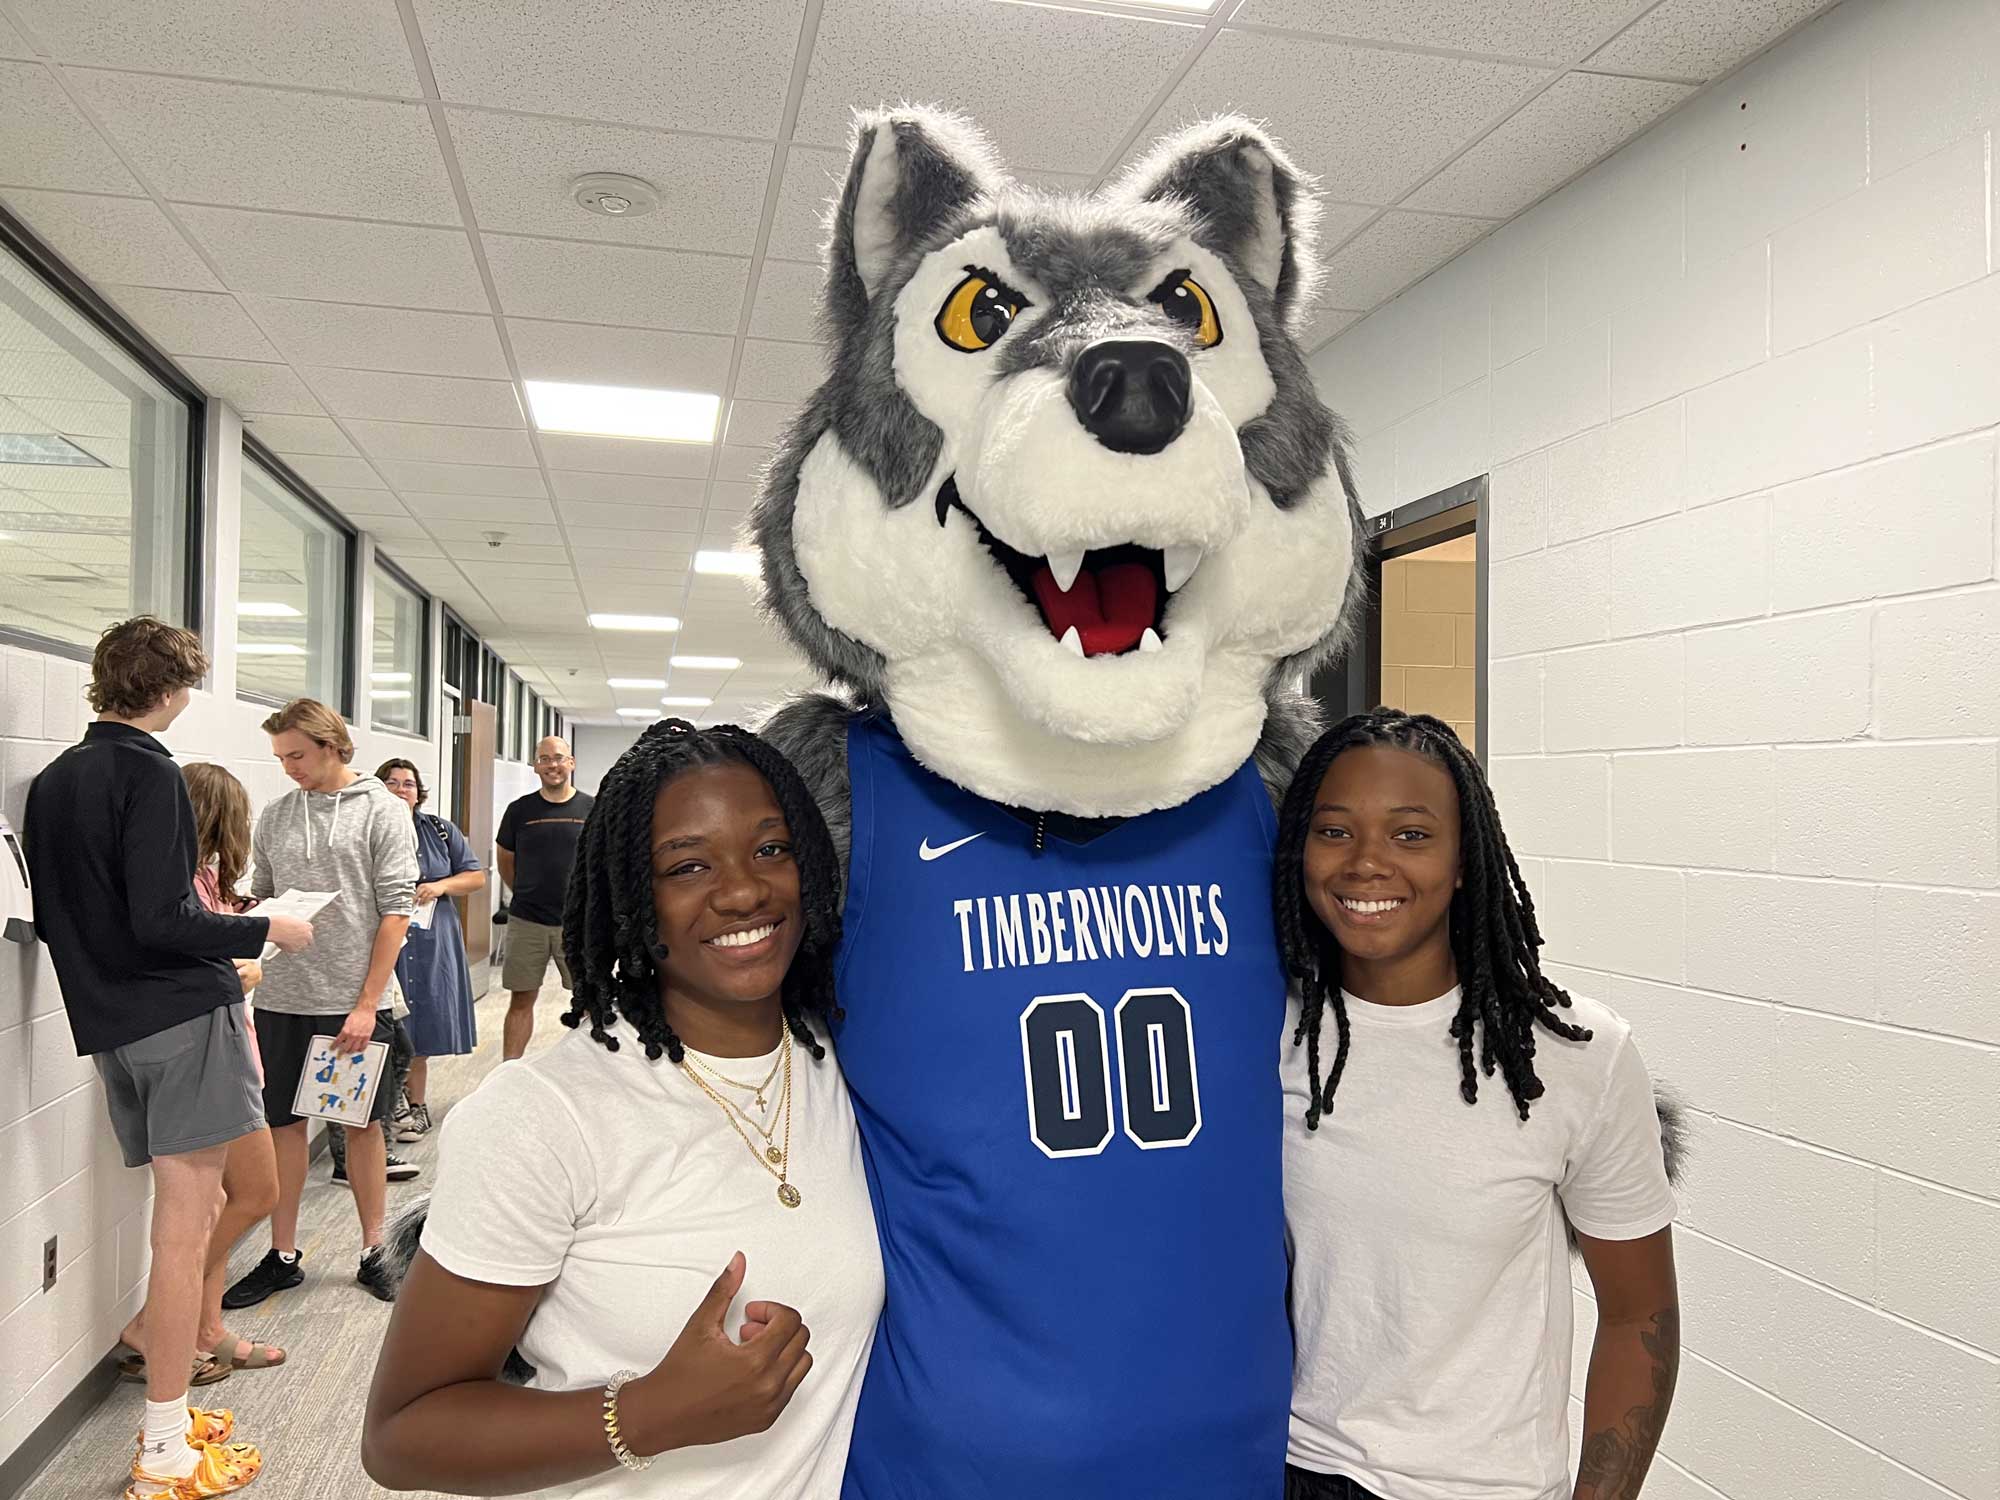 69 Students standing with Timberwolf Mascot